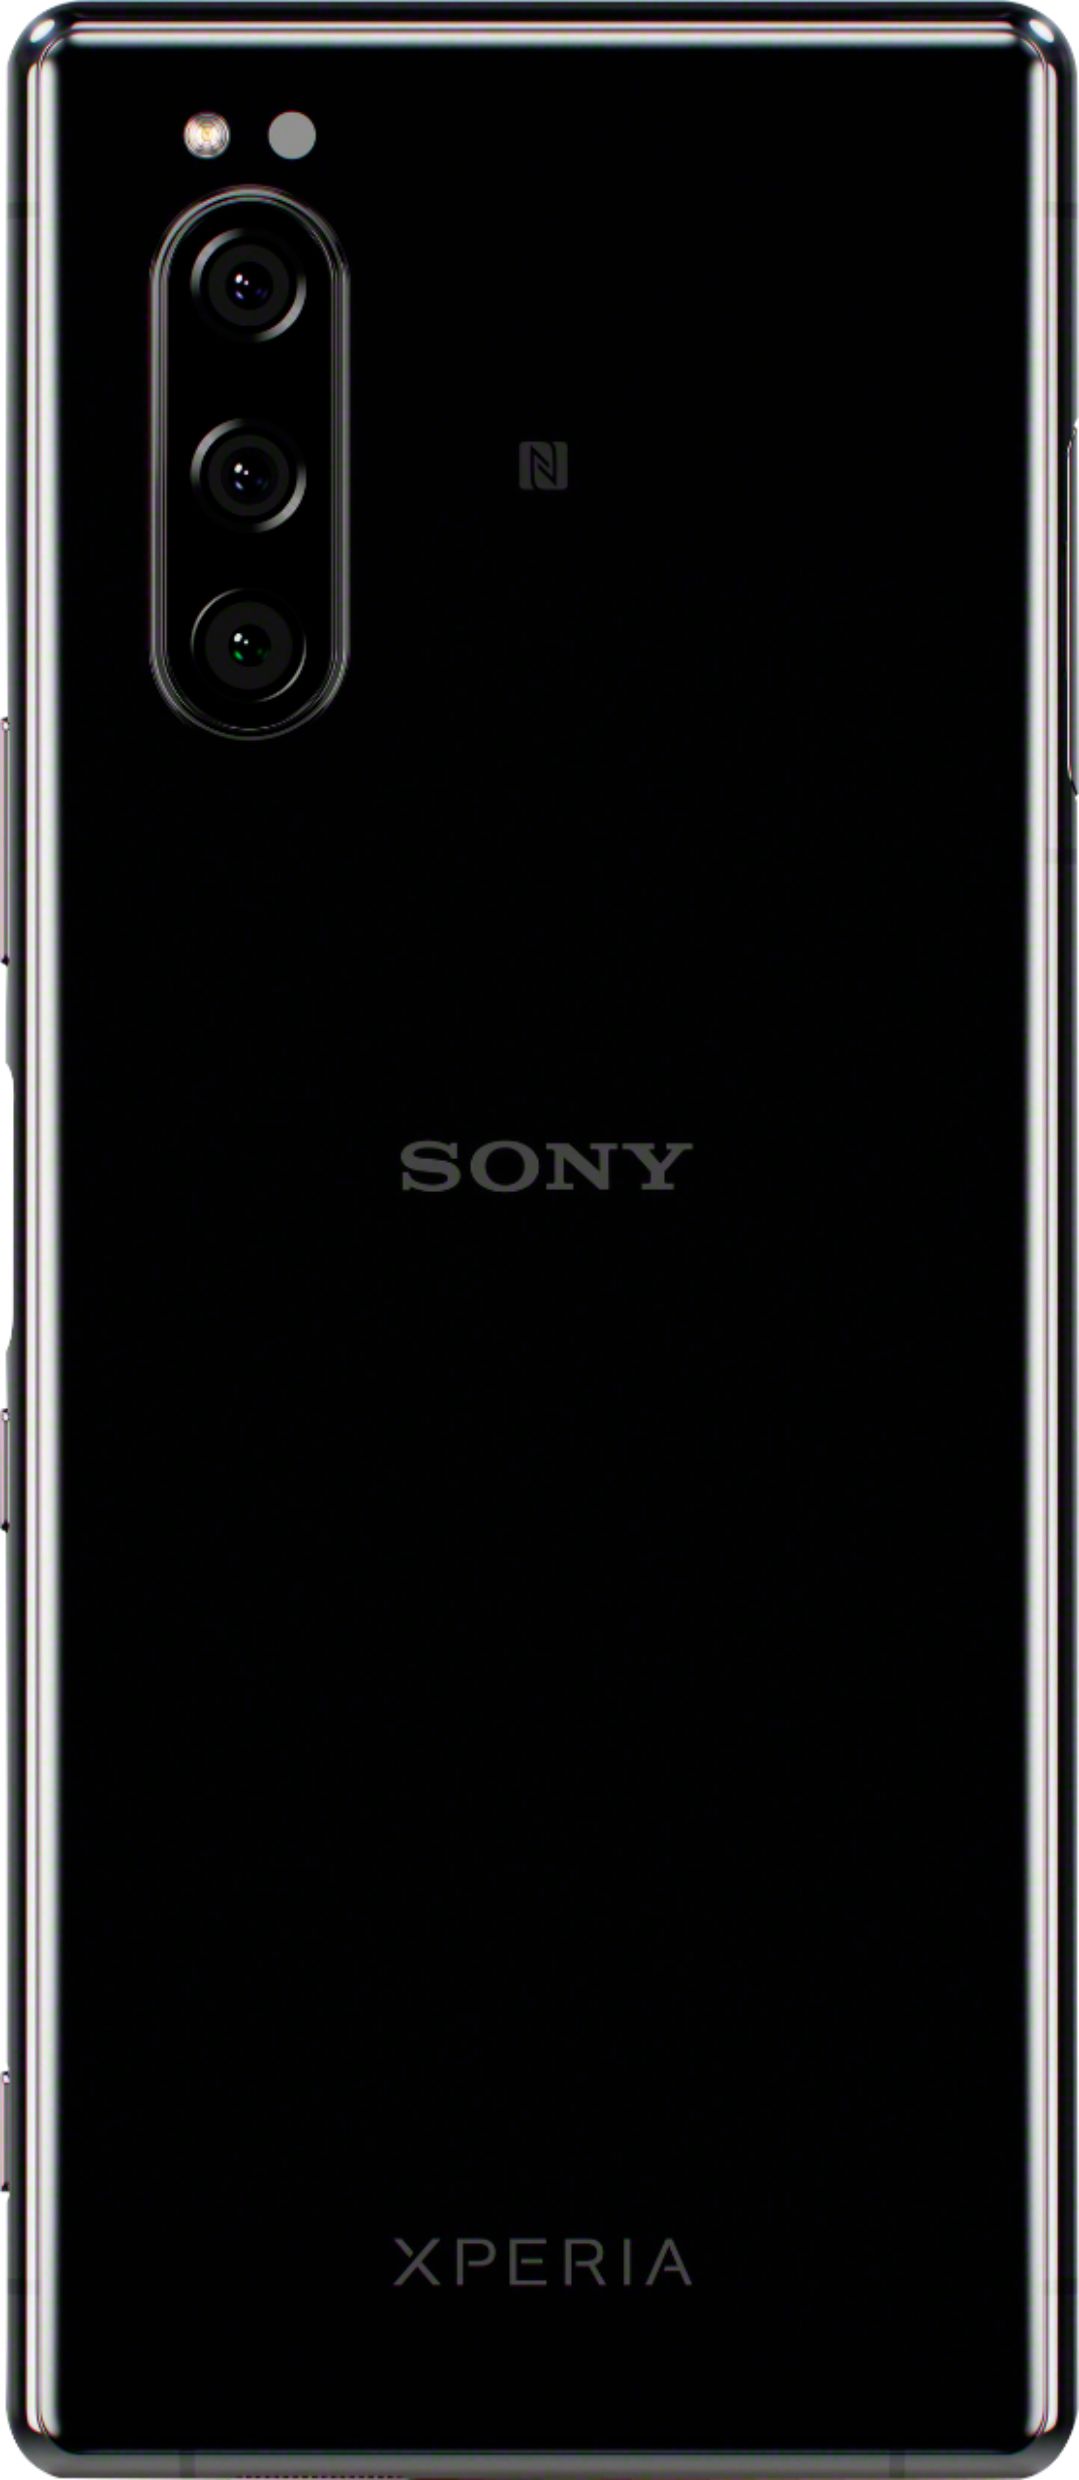 Best Buy: Sony XPERIA 5 with 128GB Memory Cell Phone (Unlocked